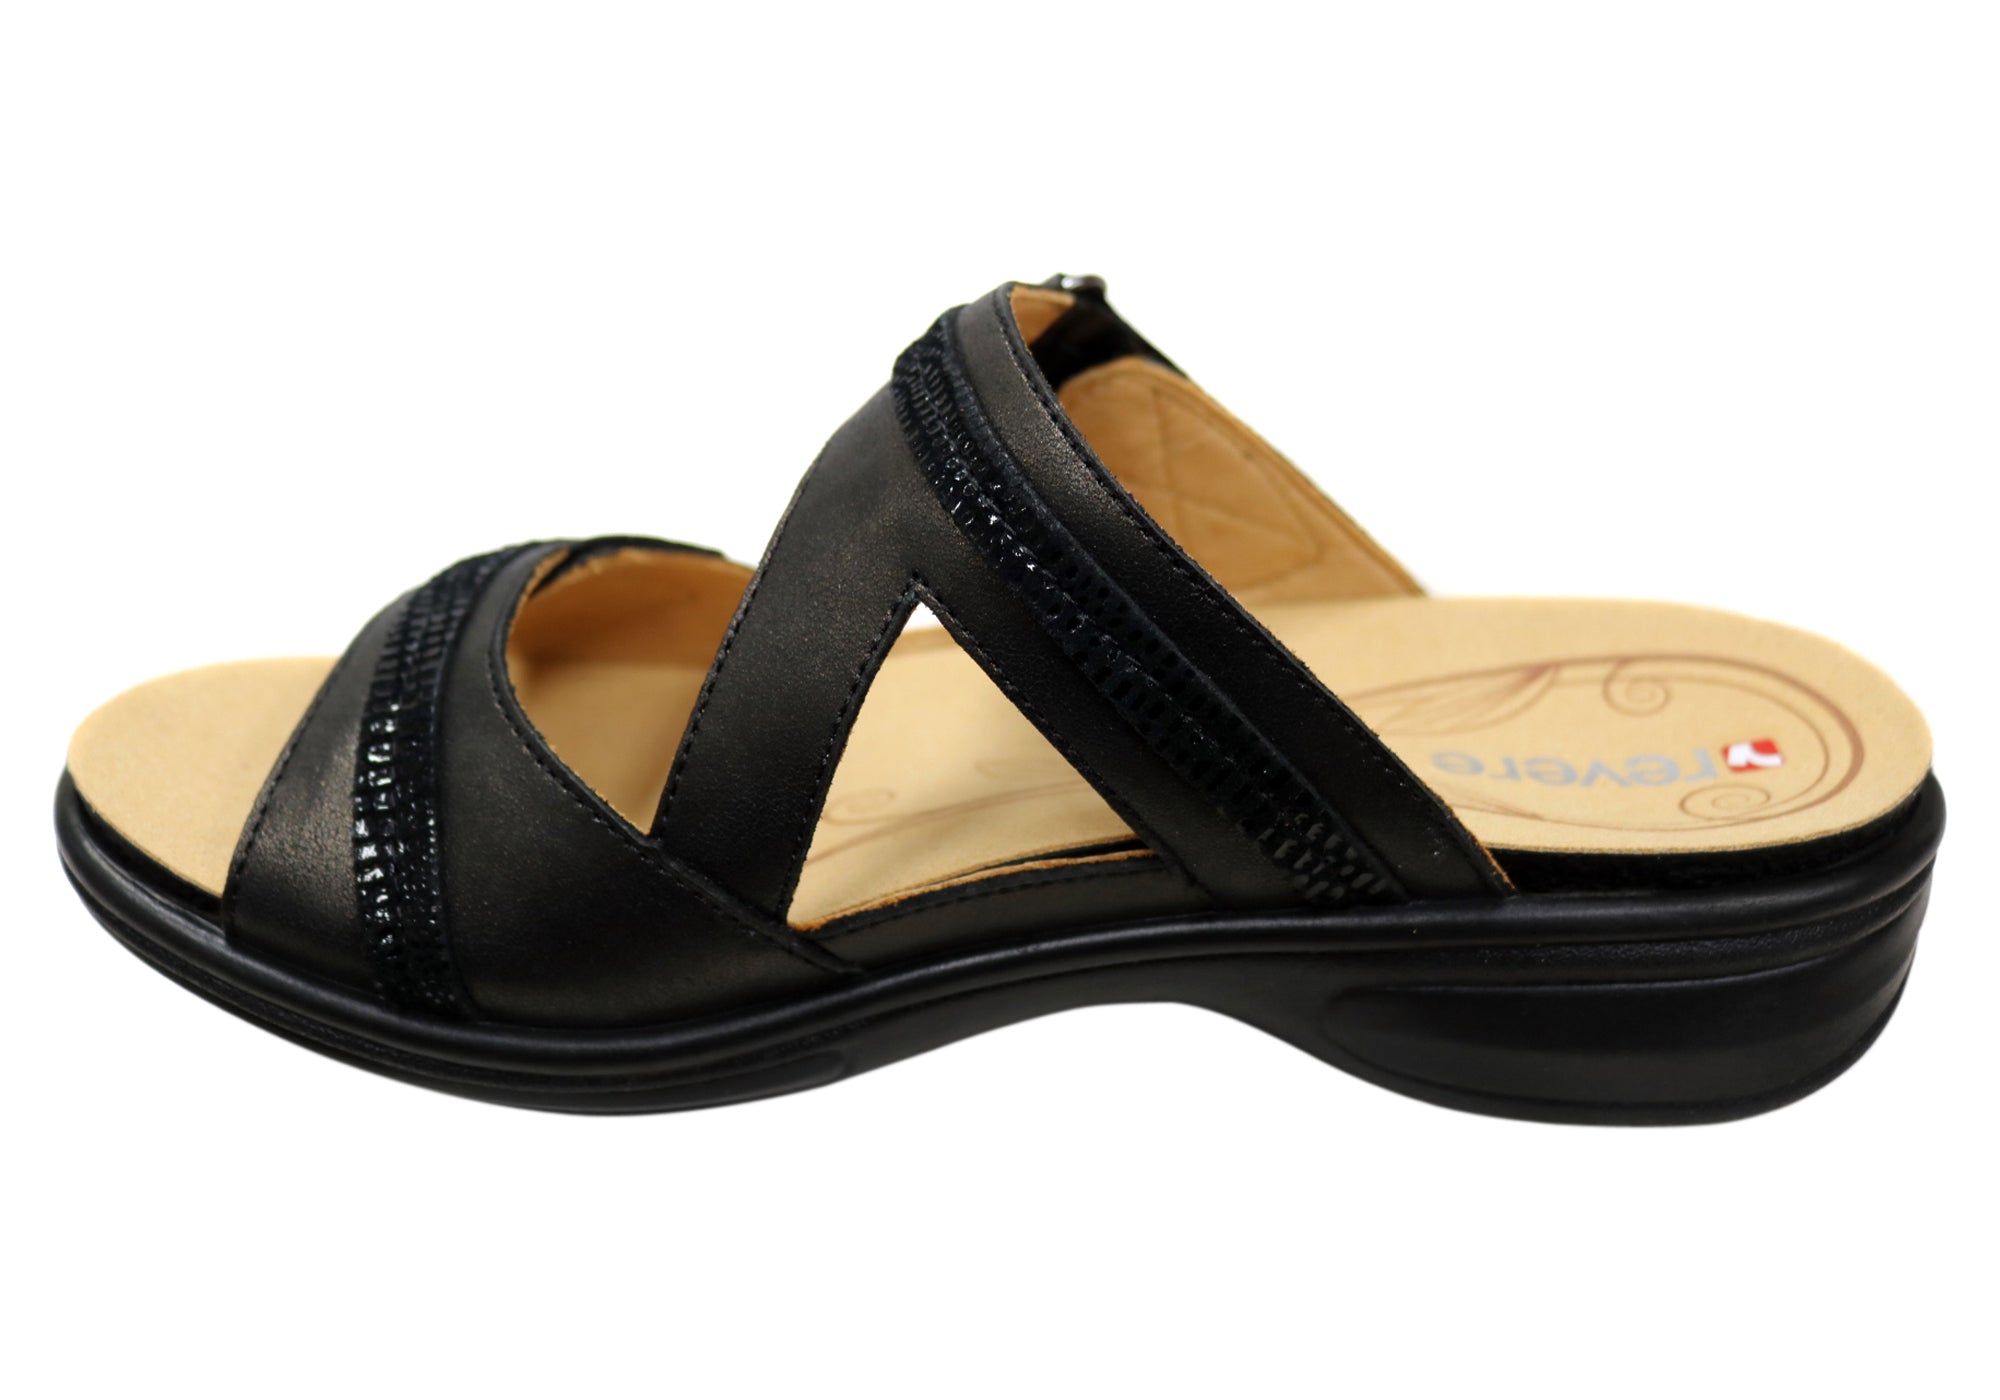 Revere Rio Womens Comfortable Leather Wide Width Slides Sandals